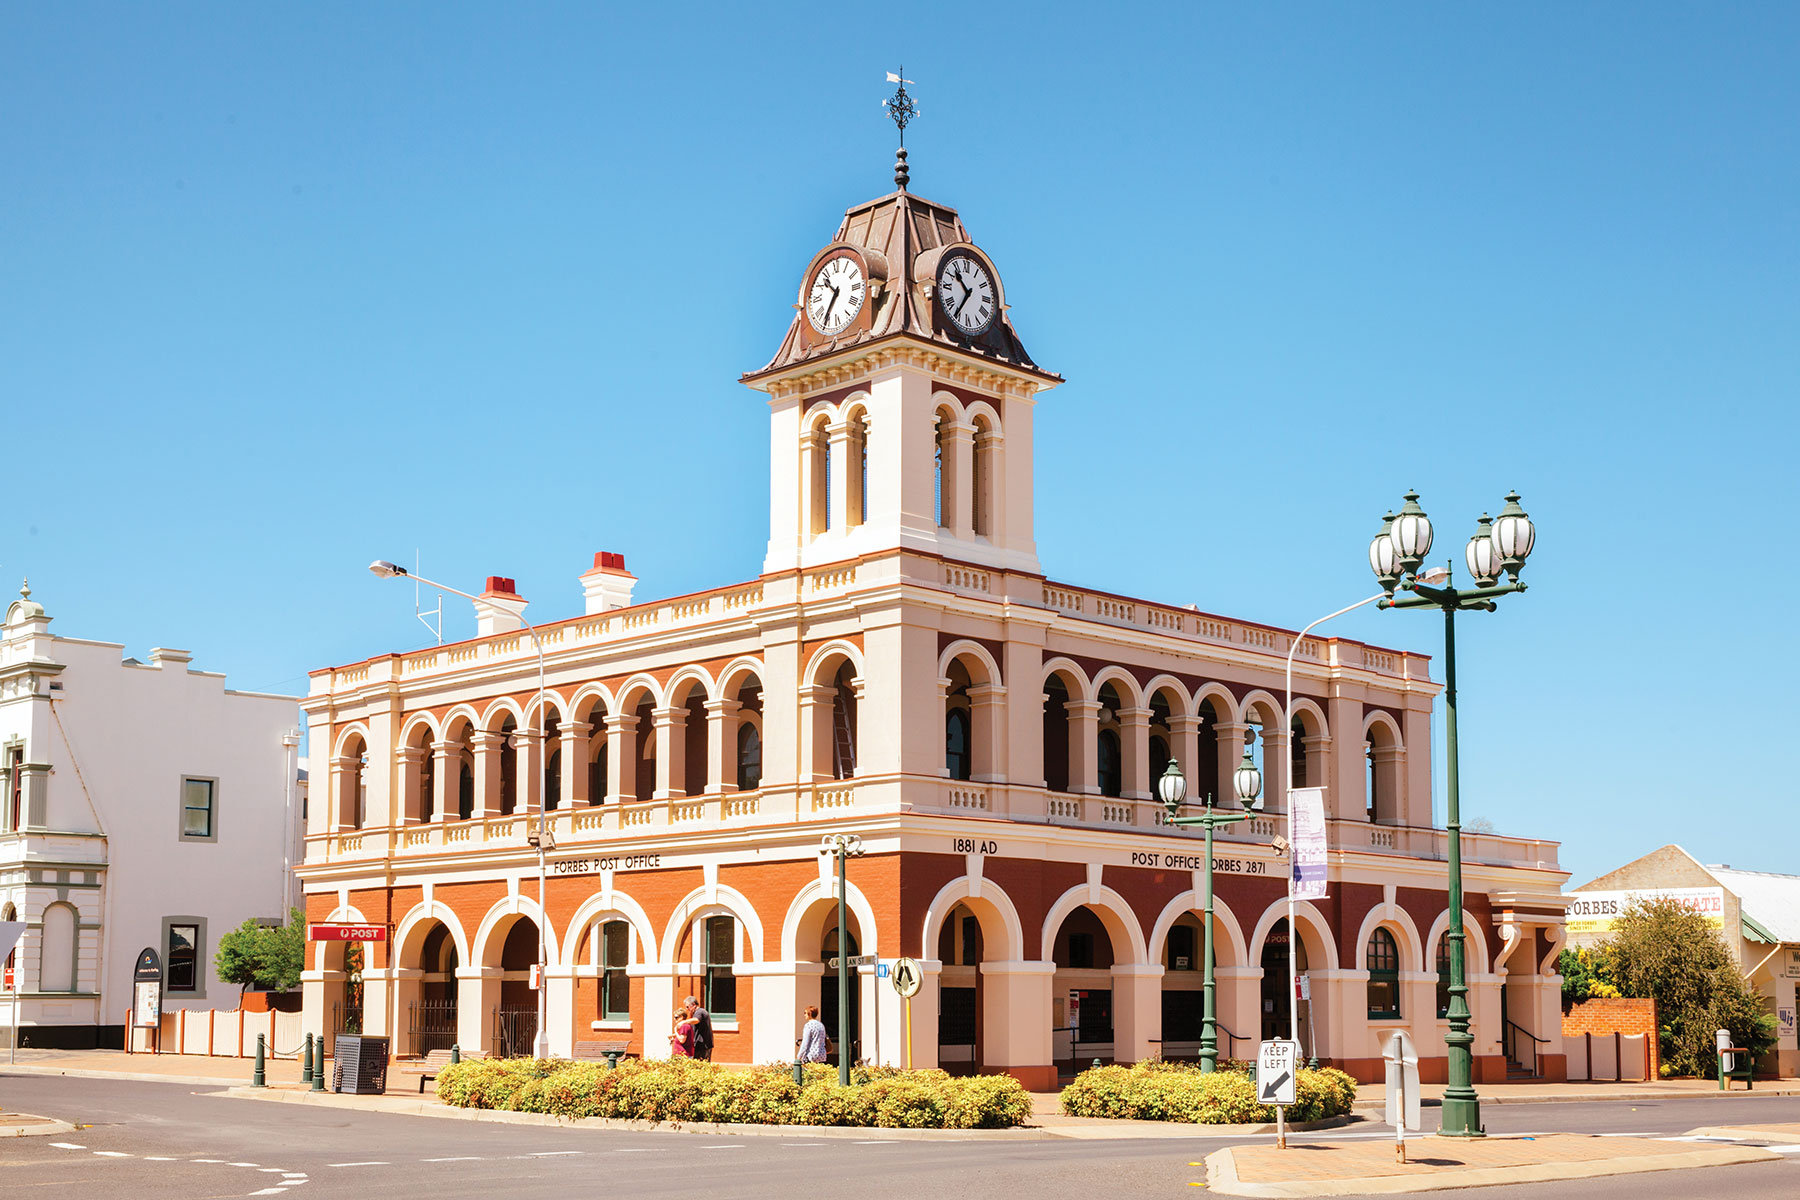 Post Office, Forbes Shire